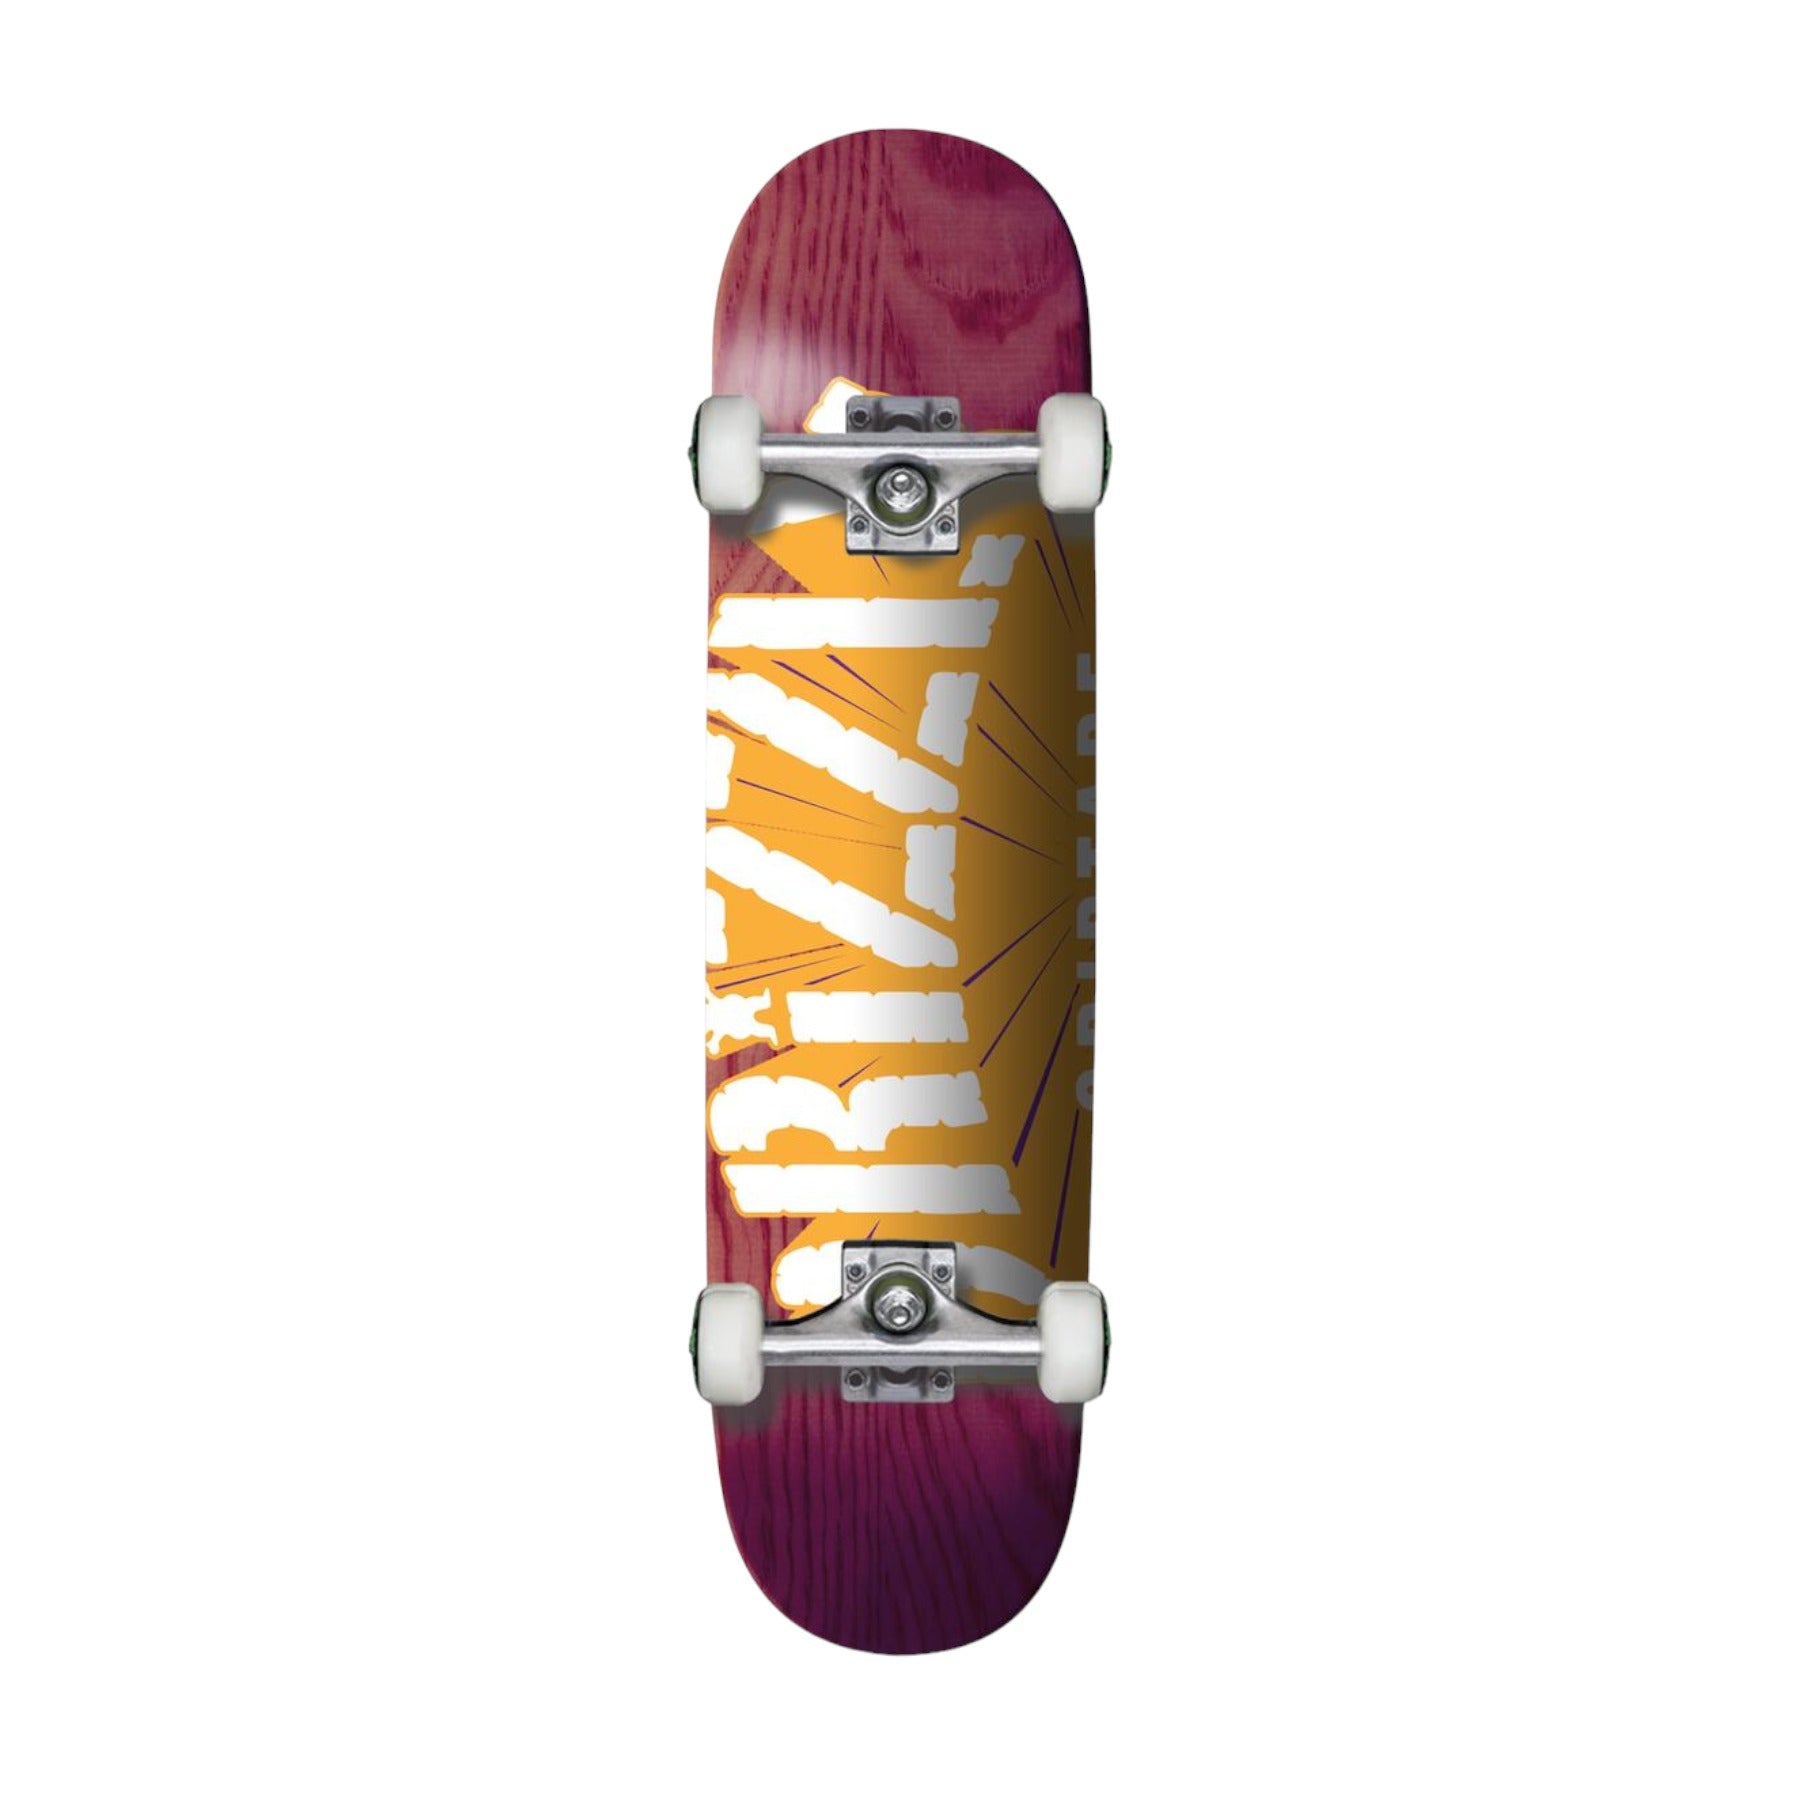 Grizzly Universidad Skateboard Complete